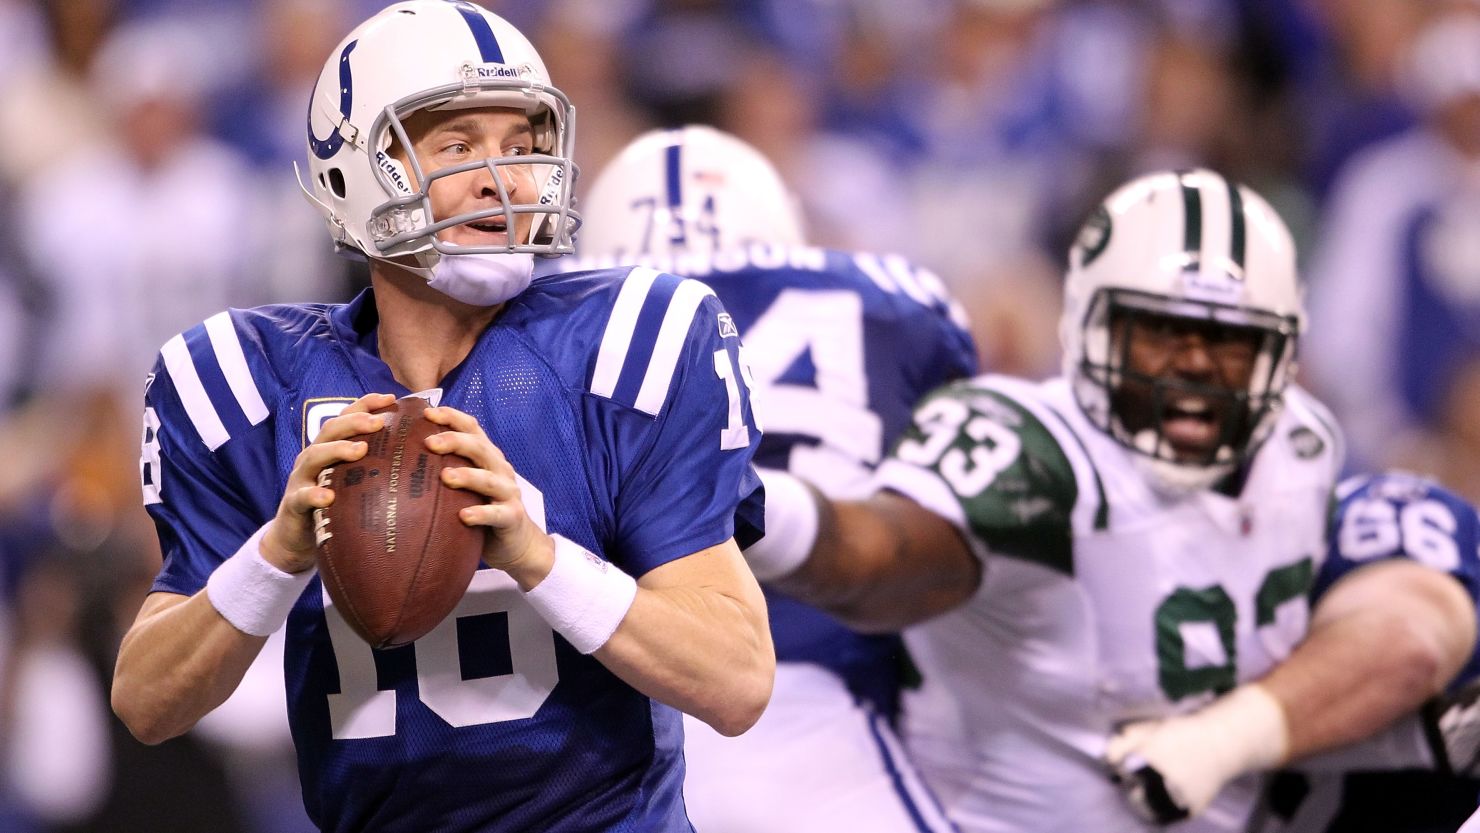 Quarterback Peyton Manning in action for the Indianapolis Colts against the New York Jets.